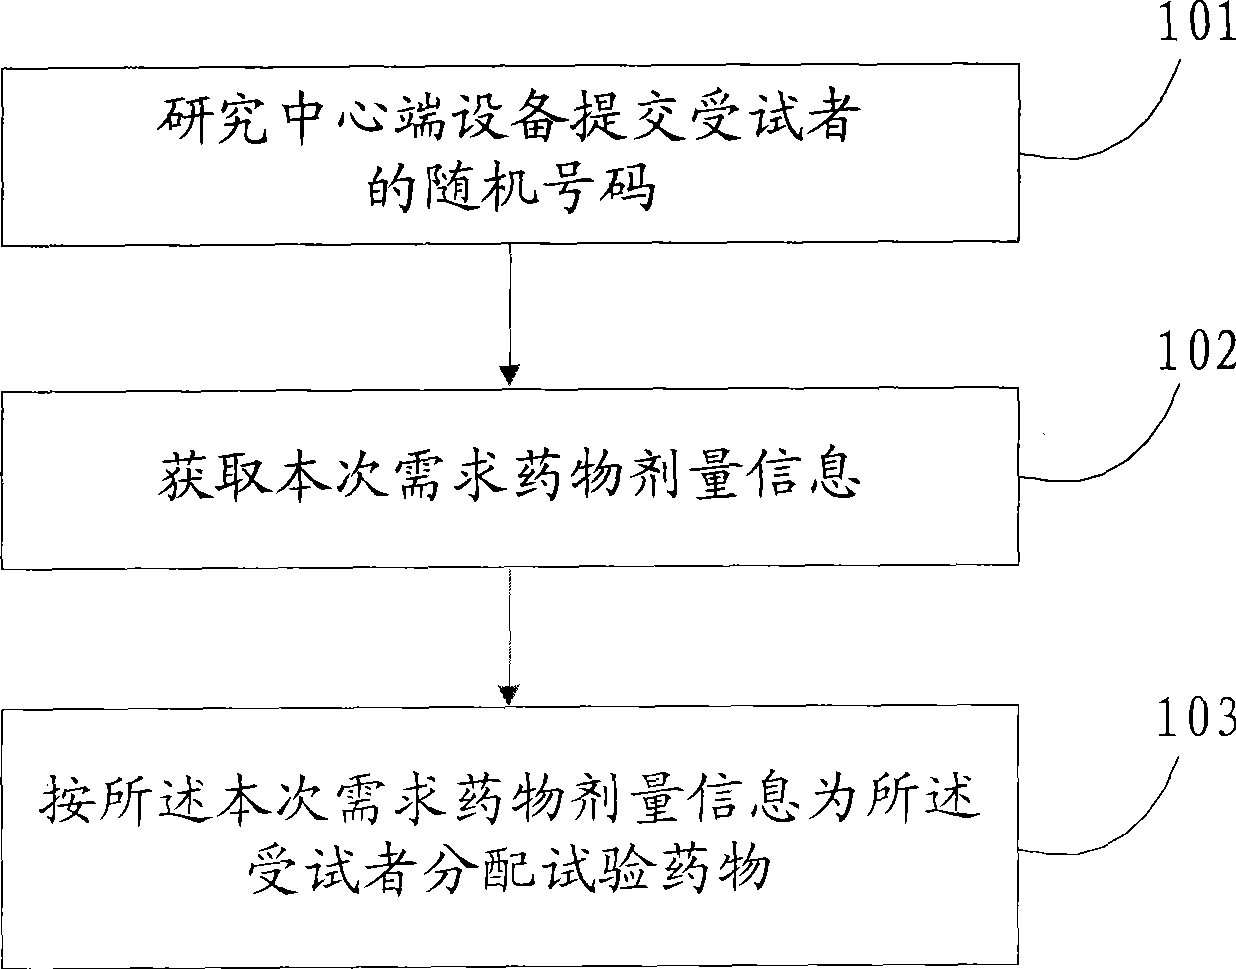 Method, device and system for distributing trial medicines in medical clinical test